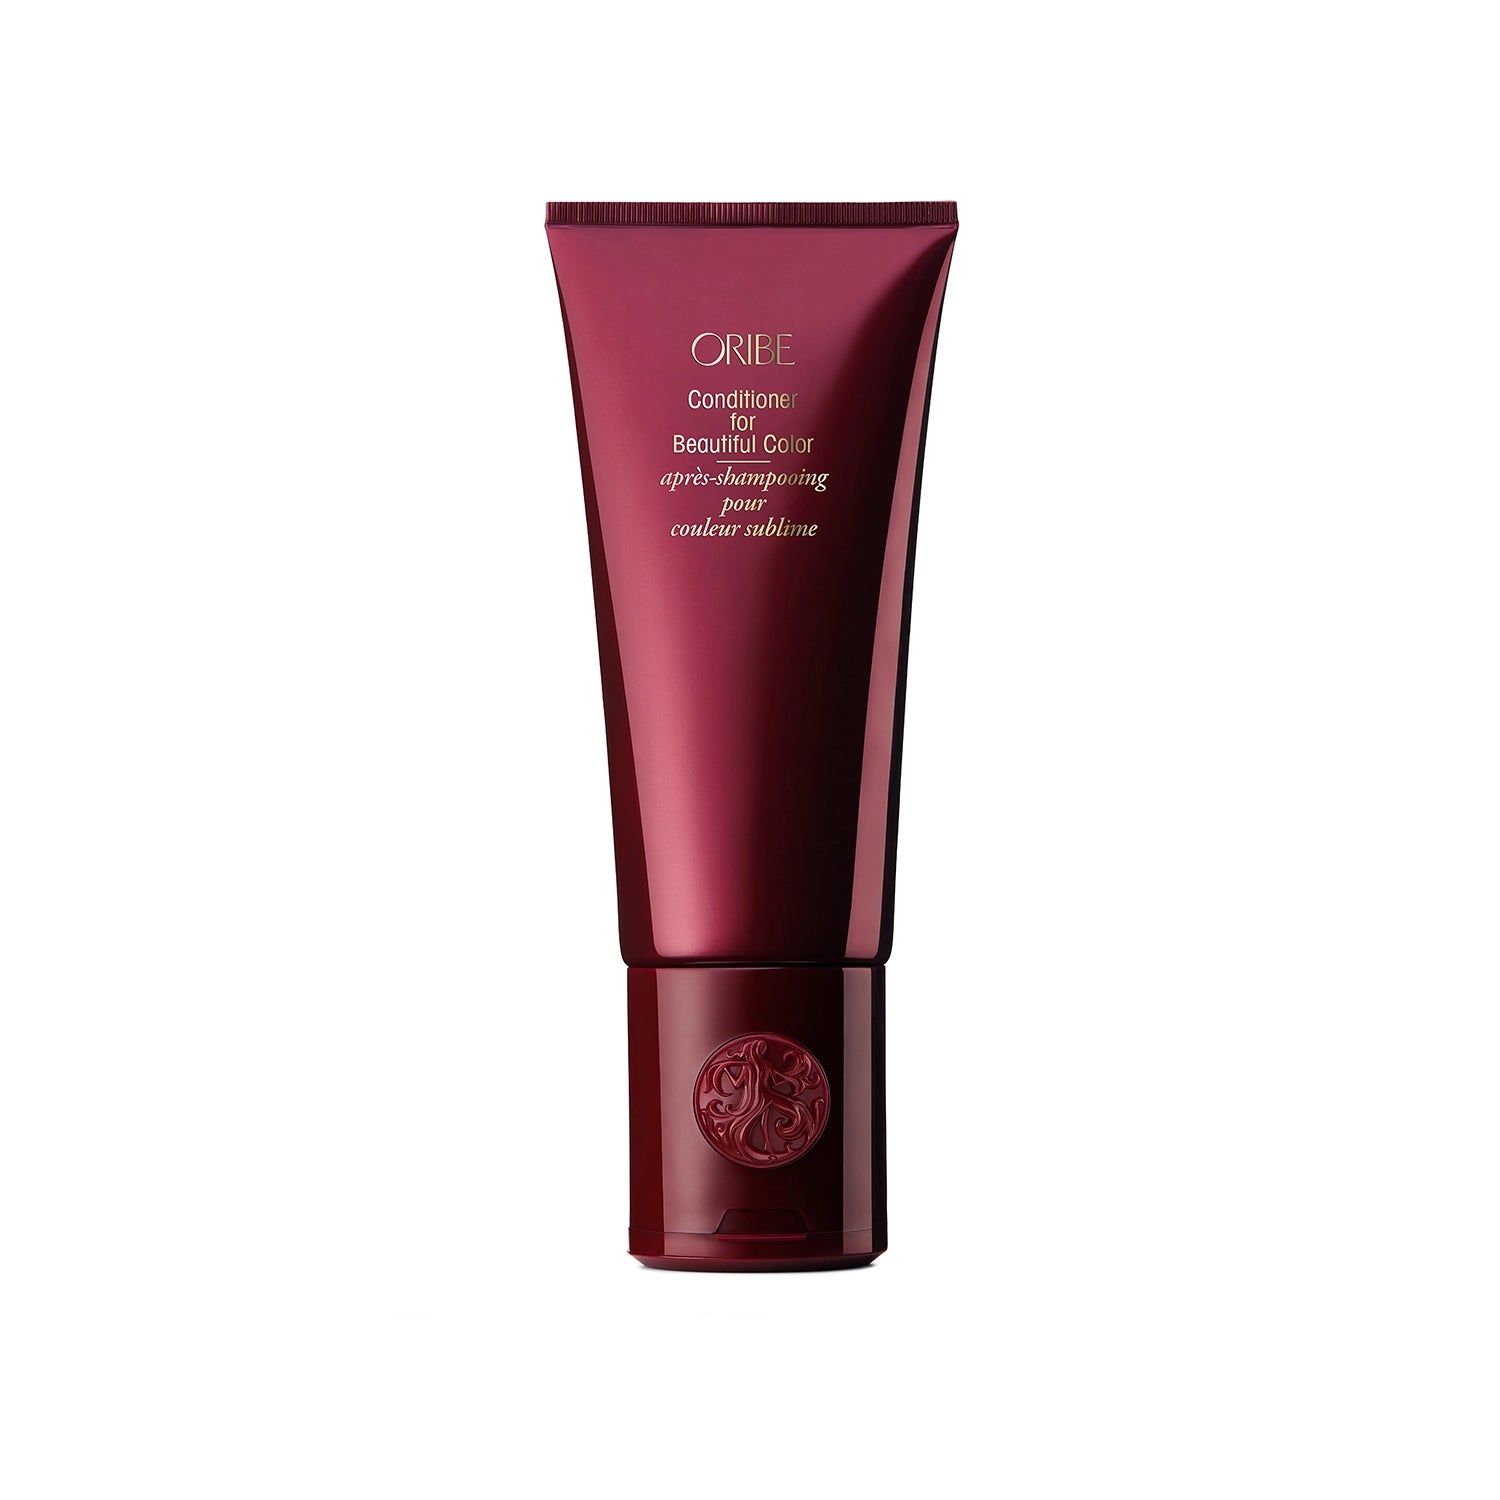 ORIBE - Conditioner for sublime color (75ml)